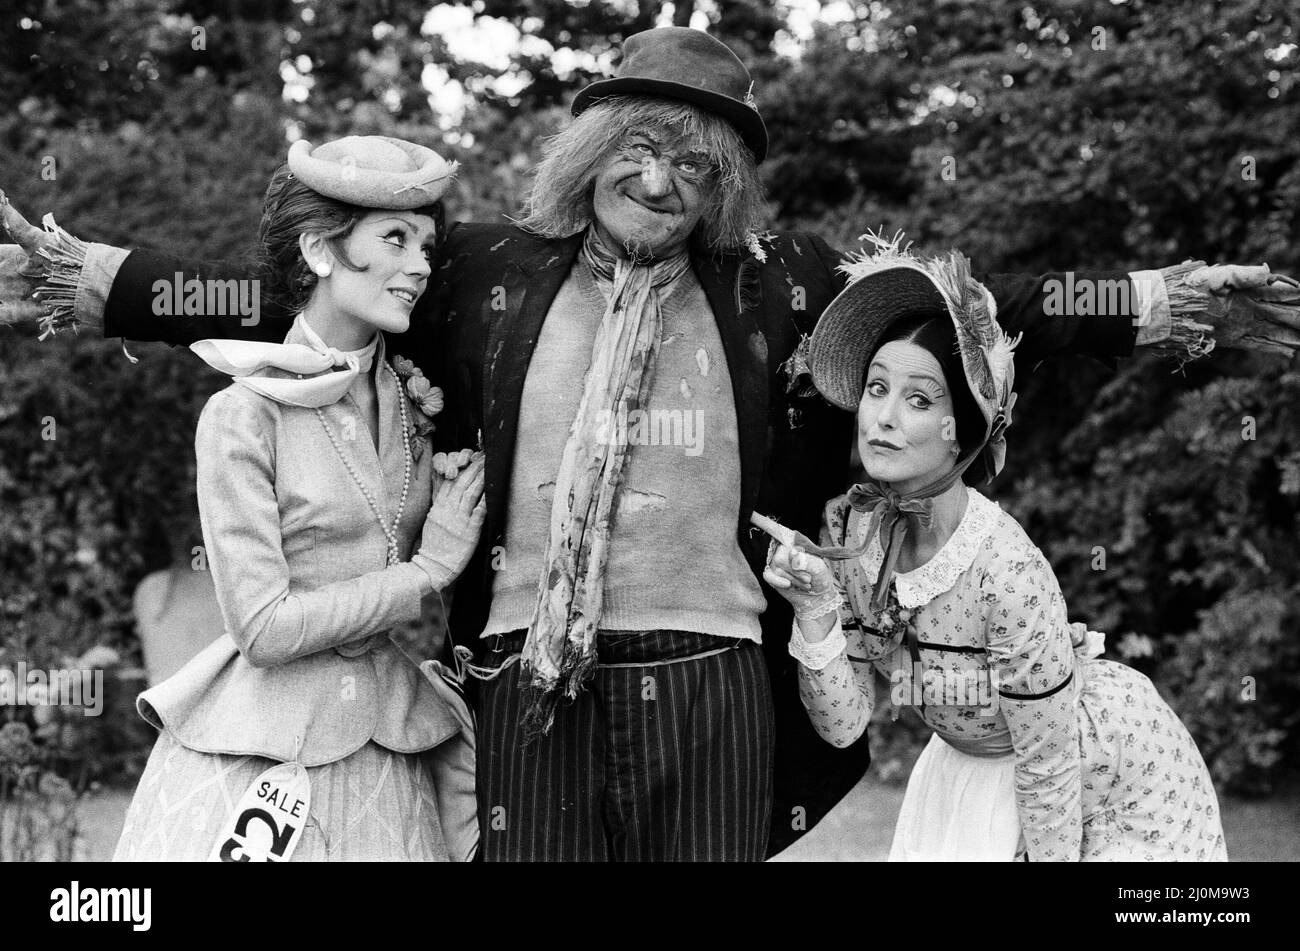 Actress Lorraine Chase (left) appears in the new series of Worzel Gummidge. She plays the part of Dolly Clothespeg, opposite Jon Pertwee as Worzel Gummidge. Dolly Clothespeg is Worzel's latest girlfriend, who upsets regular girlfriend Aunt Sally, played by Una Stubbs (right). 1st August 1980. Stock Photo